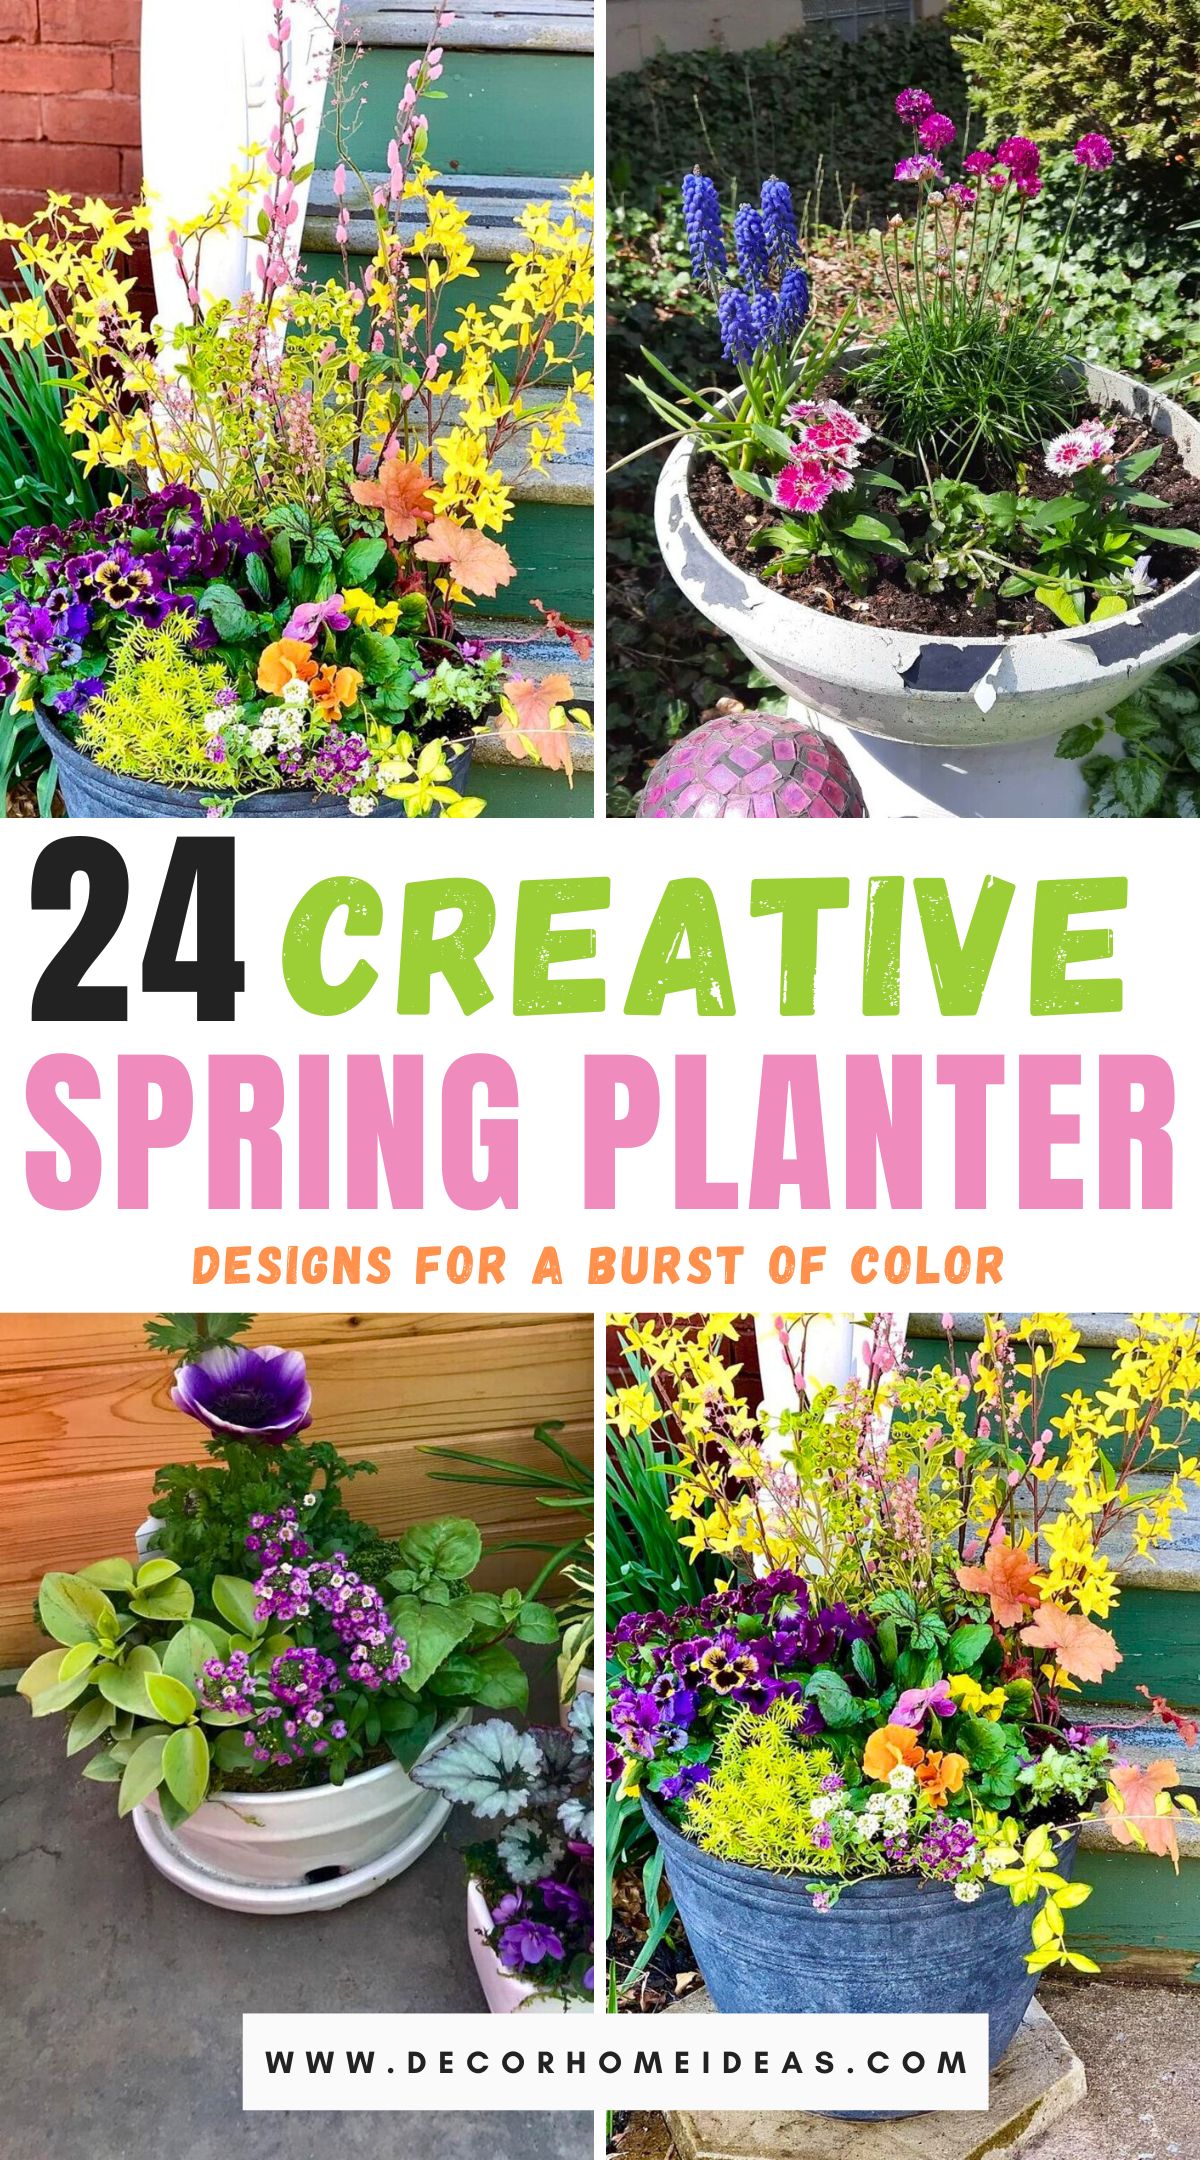 Elevate your garden with these 24 spring planter ideas, designed to infuse new life and vibrant colors into your outdoor space. From cascading floral arrangements to whimsical succulent displays, find inspiration to transform your garden into a blooming paradise.